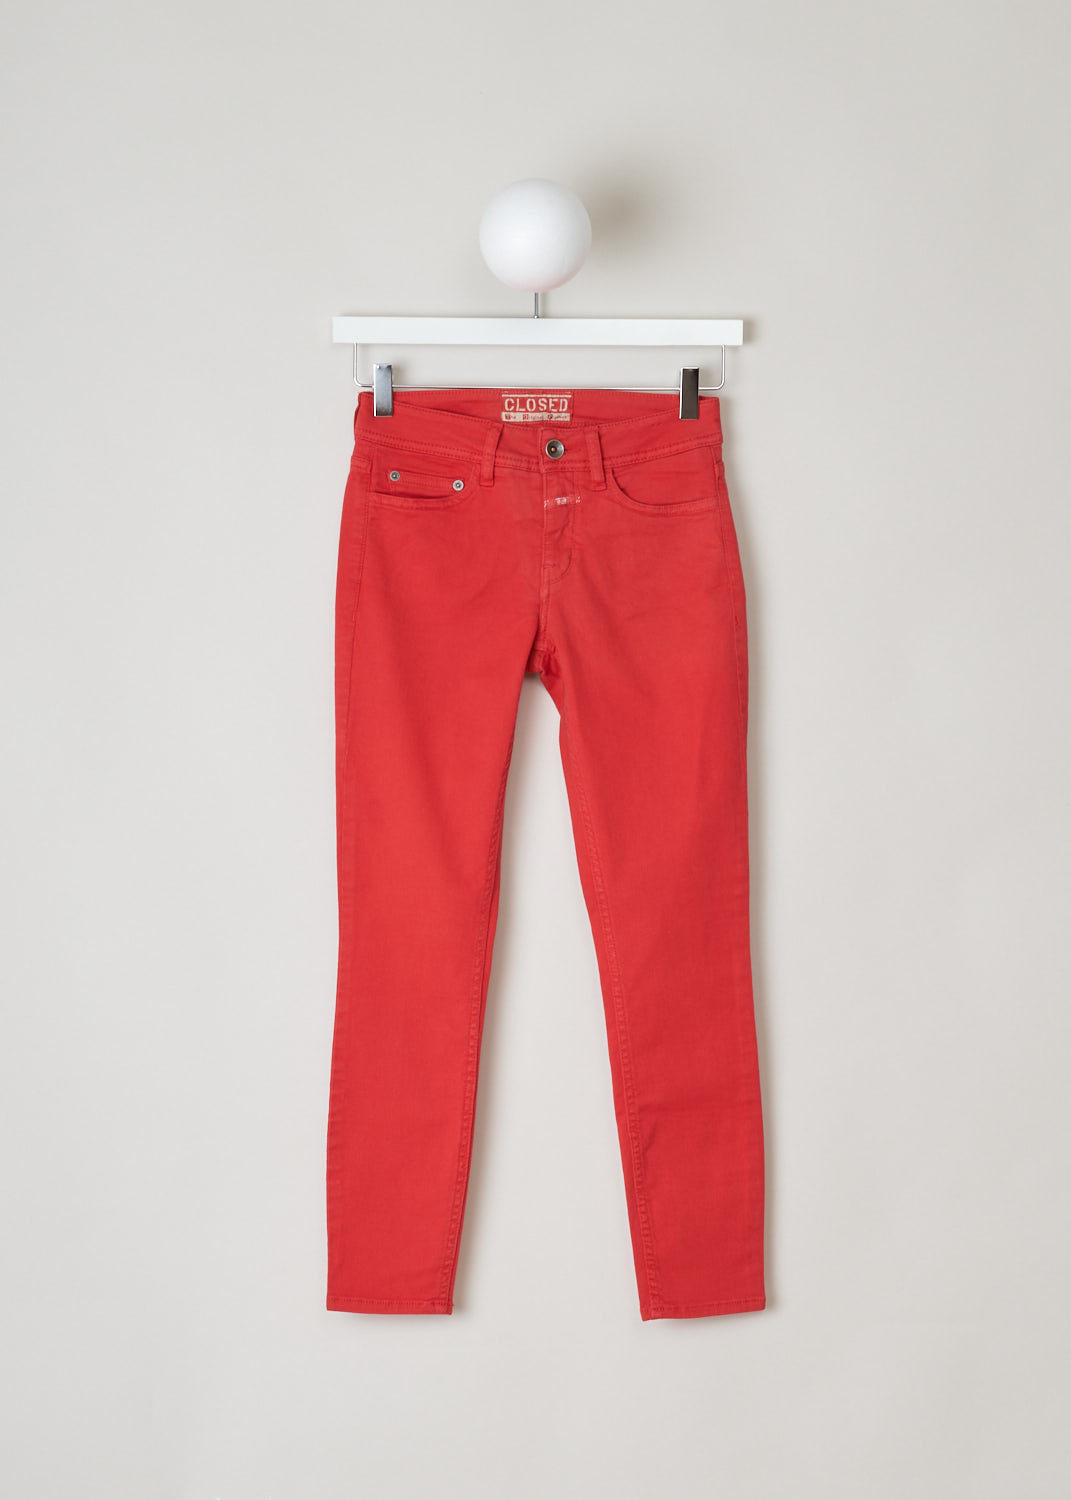 Closed, Slim-fit mid-waist red jeans, baker_C91833_07N_3L_343, red, front, Mid-waist slim-fit jeans made with cropped length, to show off any shoe you are wearing. Comes with the traditional 5 pockets and as you fastening option you get a zipper and button on the front. 